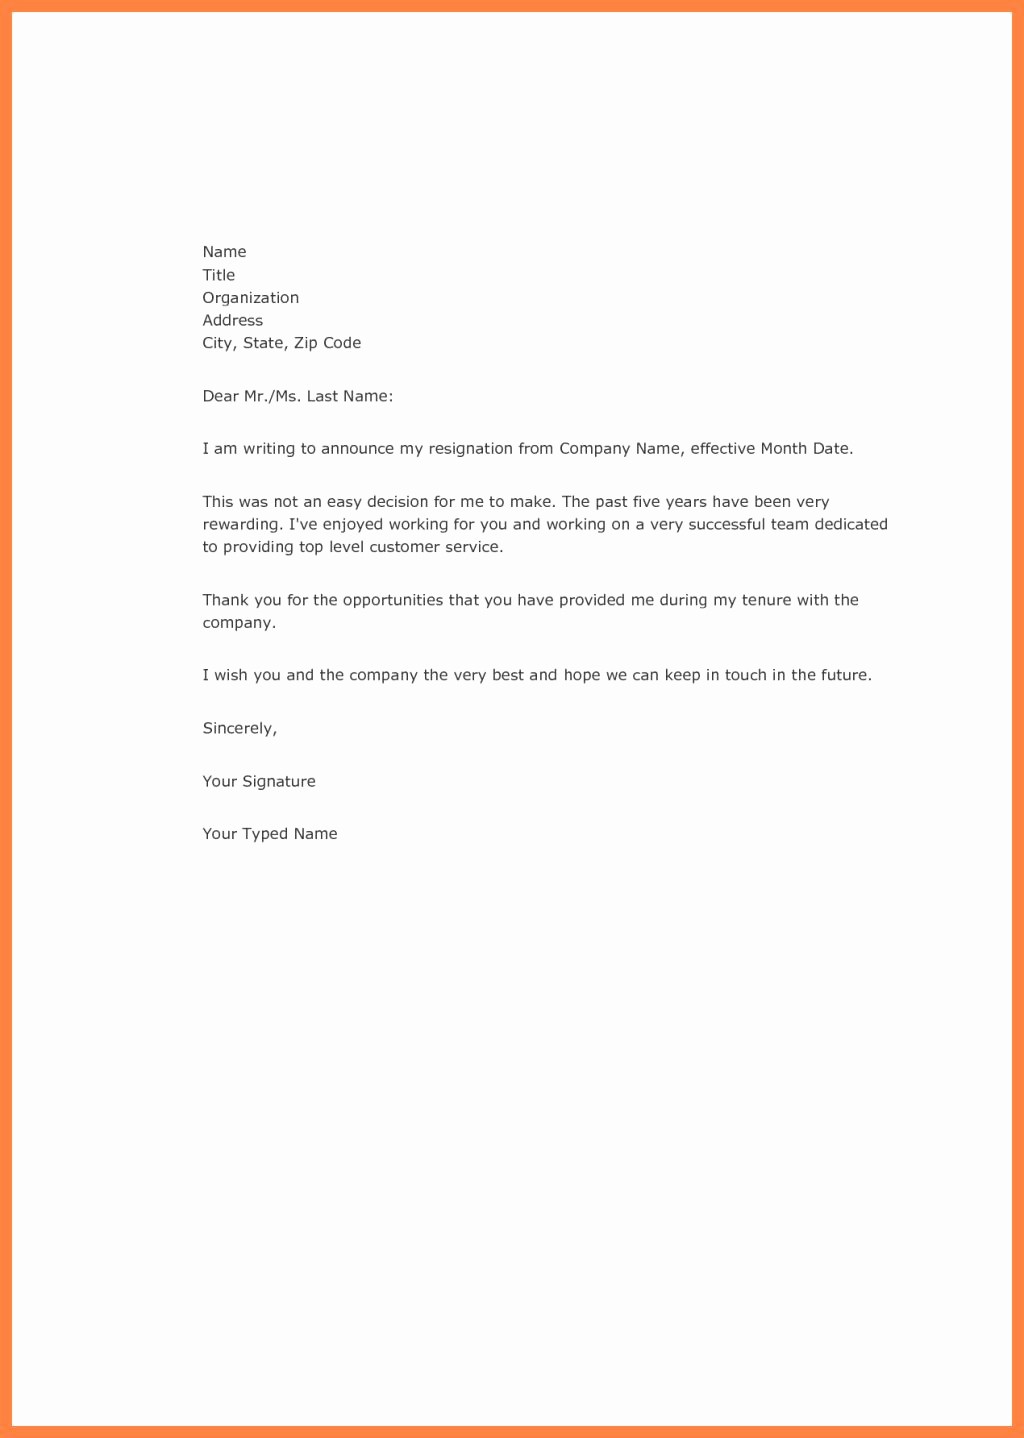 Letter Of Resignation Template Download Best Of Great Free Resignation Letter Samples – Letter format Writing